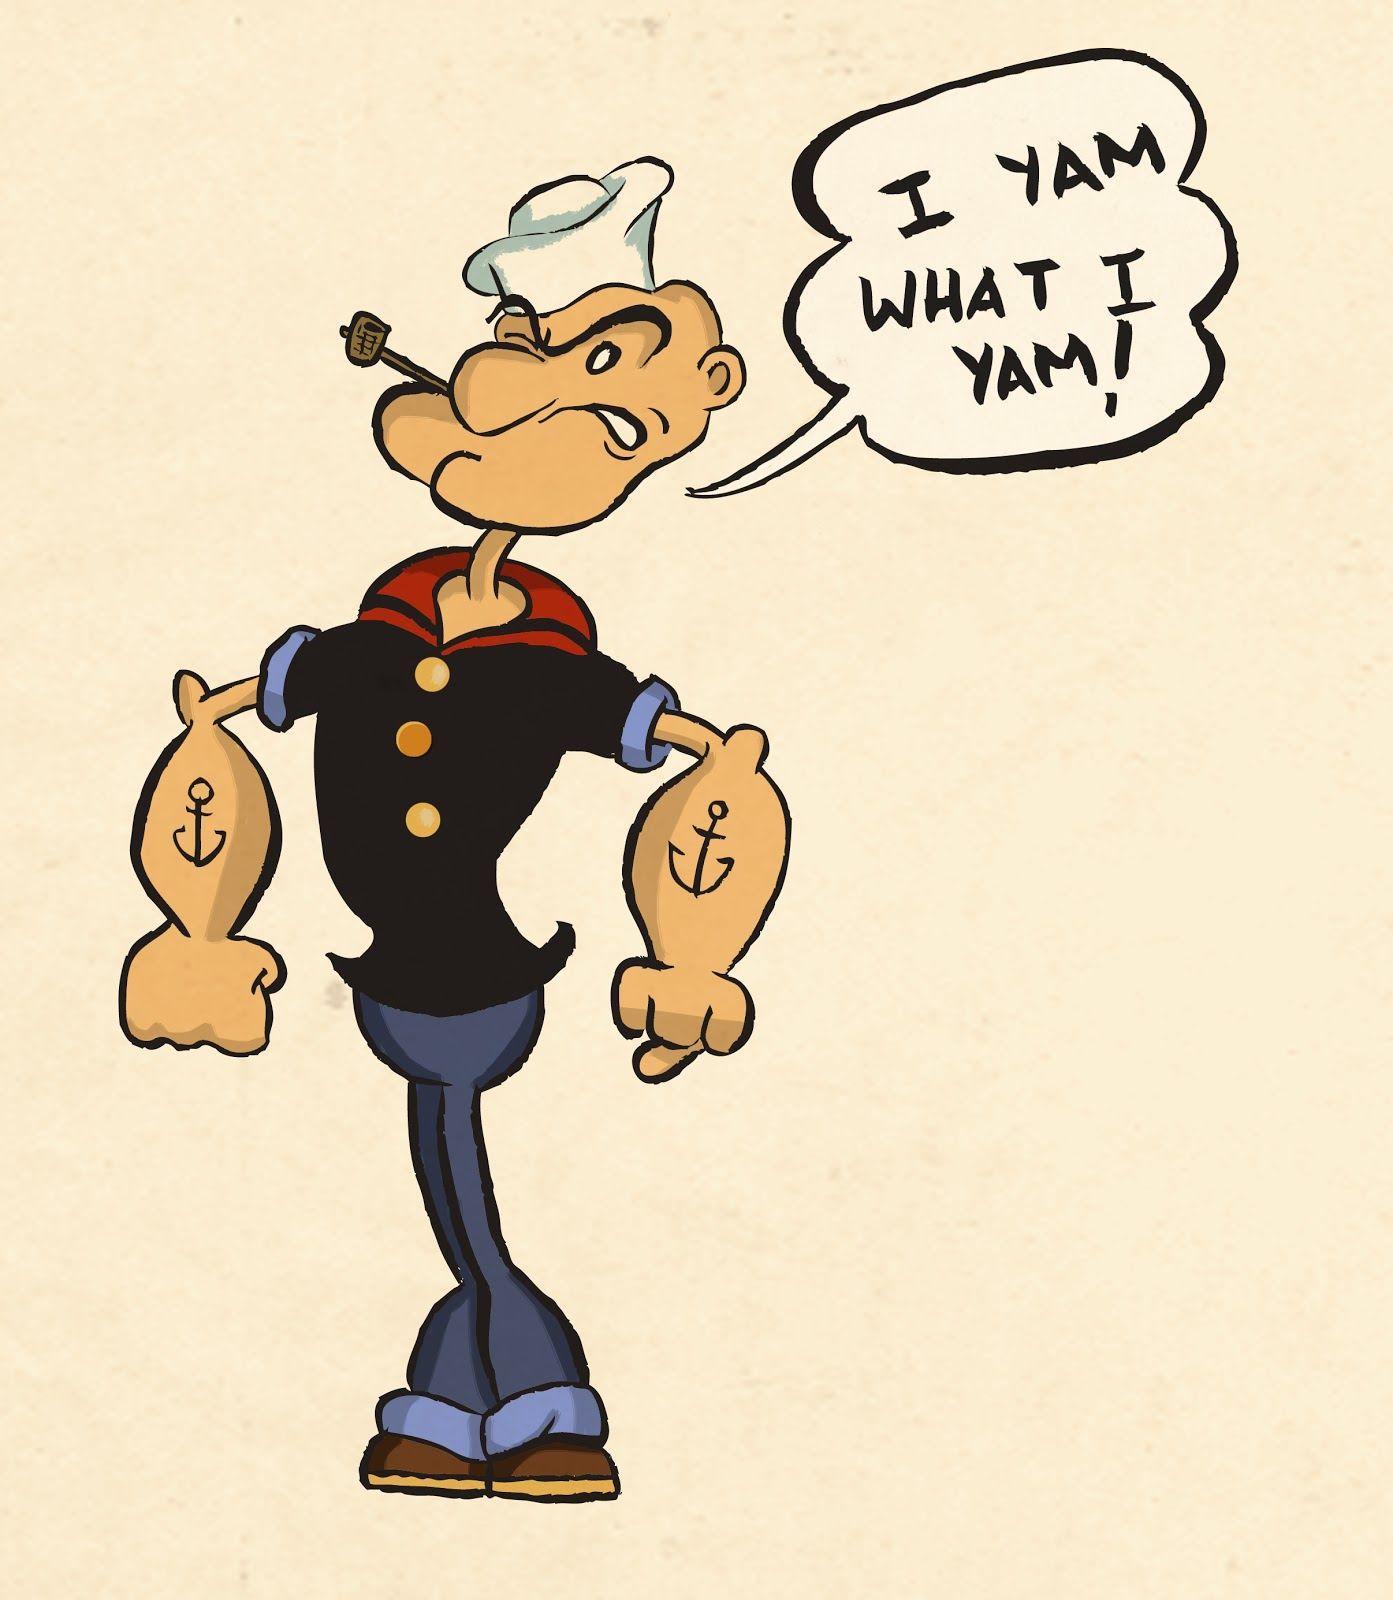 Popeye the Sailor Man Full HD Image Wallpapers for PC